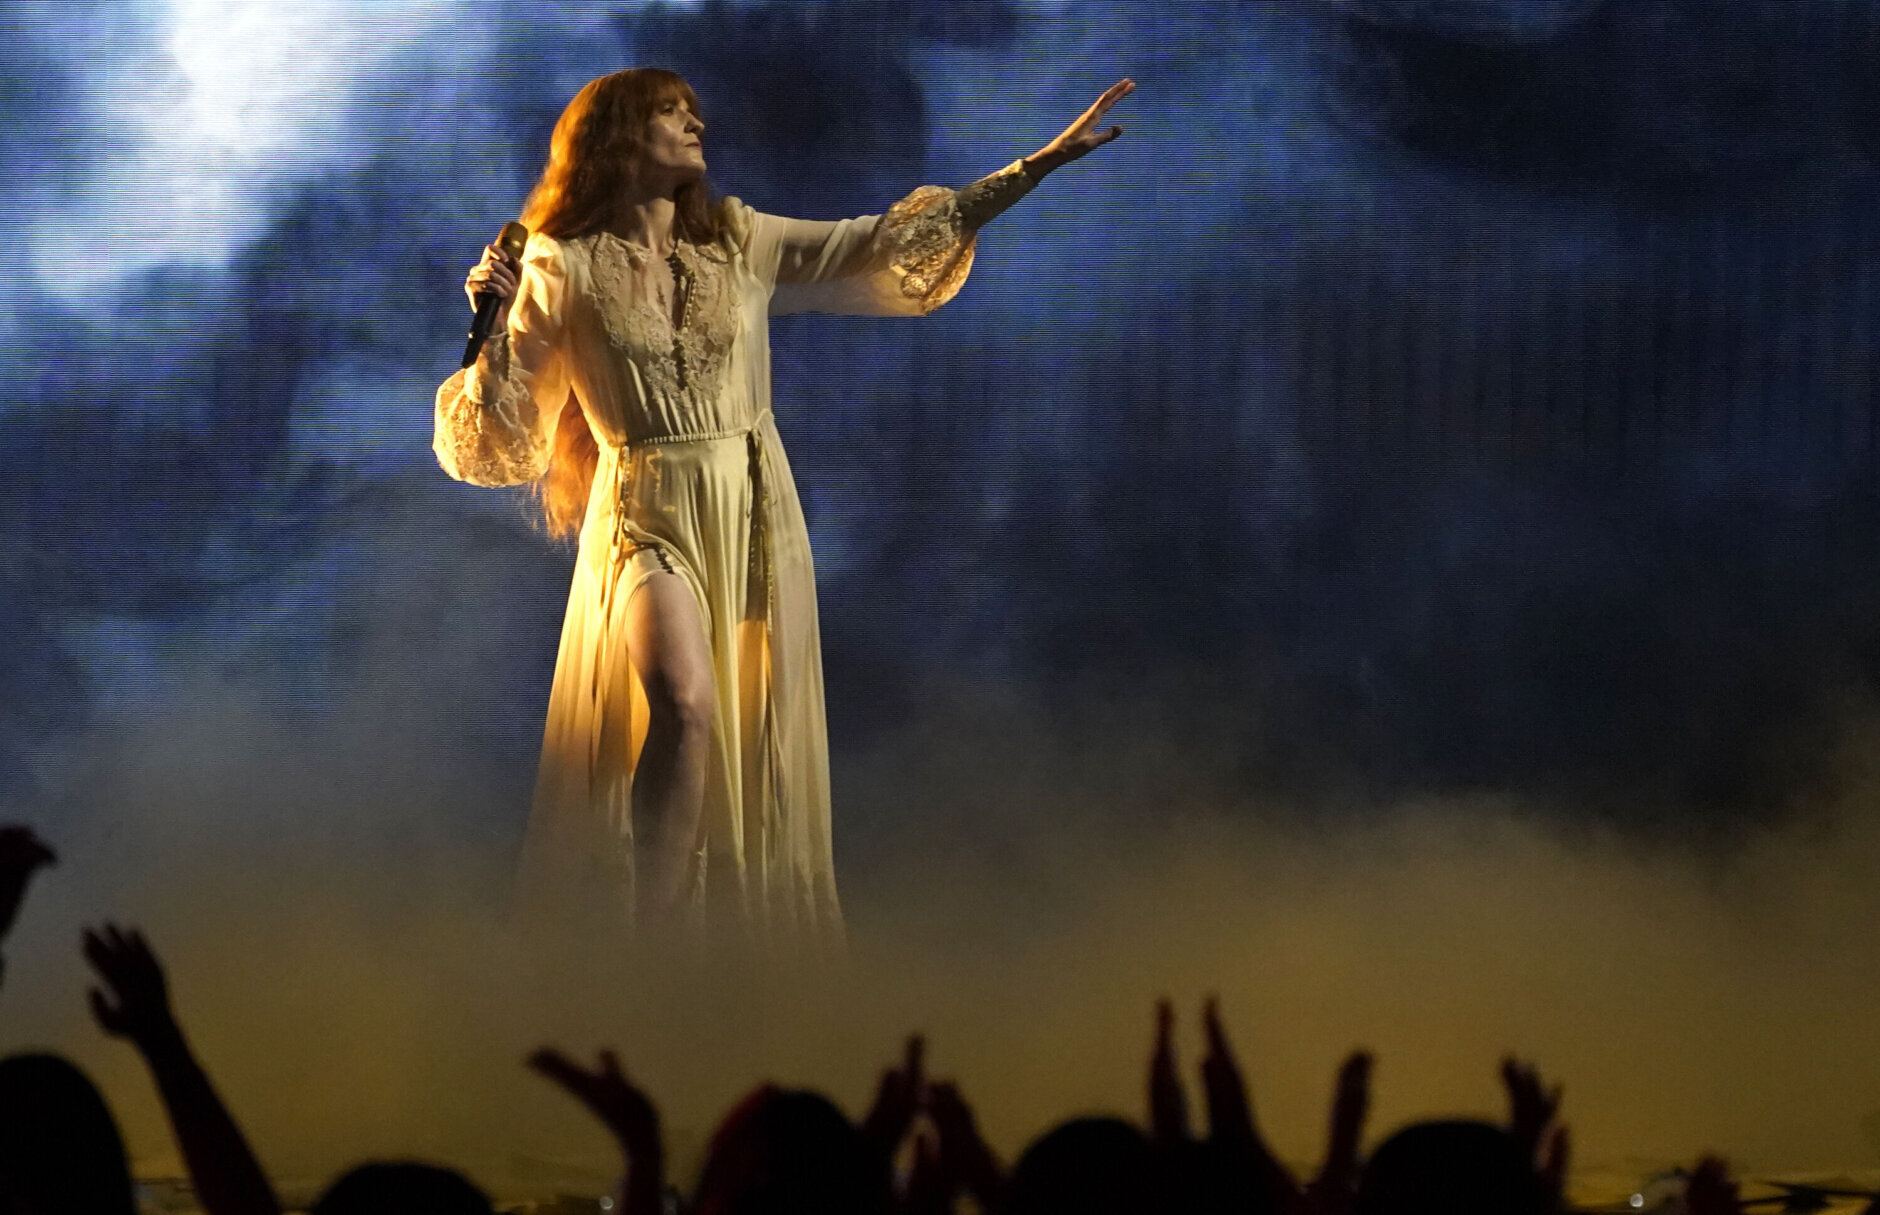 Florence Welch of Florence and the Machine performs "My Love" at the Billboard Music Awards on Sunday, May 15, 2022, at the MGM Grand Garden Arena in Las Vegas. (AP Photo/Chris Pizzello)